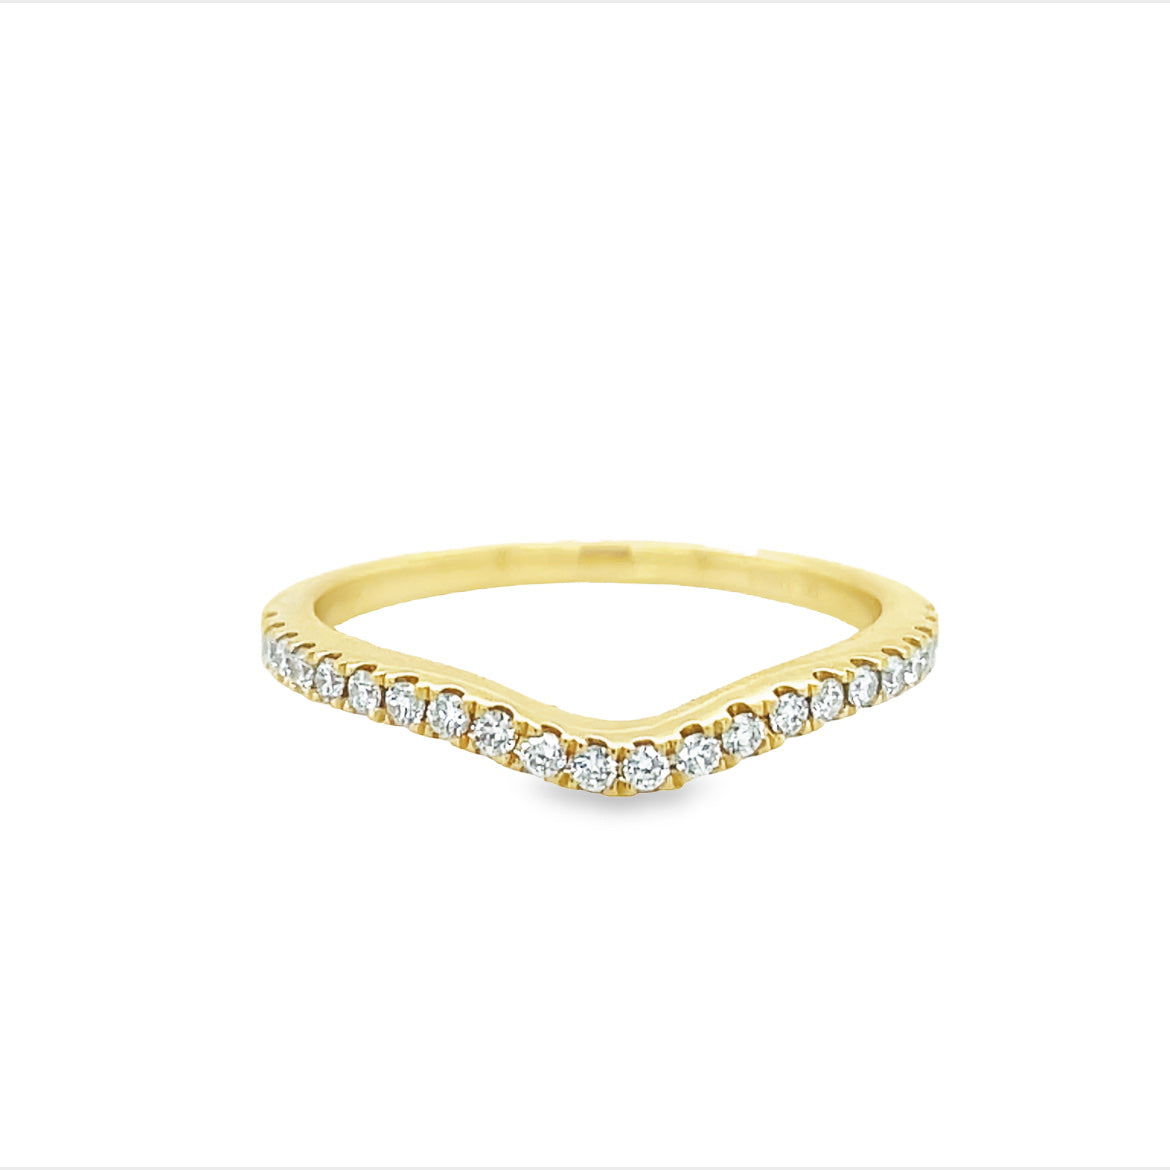 This stunning Diamond Wave Ring features 18k yellow gold and 0.20 cts of round diamonds, creating a unique curve style that is sure to catch the eye. Elevate any outfit with this elegant accessory that radiates luxury and sophistication. A must-have for any jewelry collection!